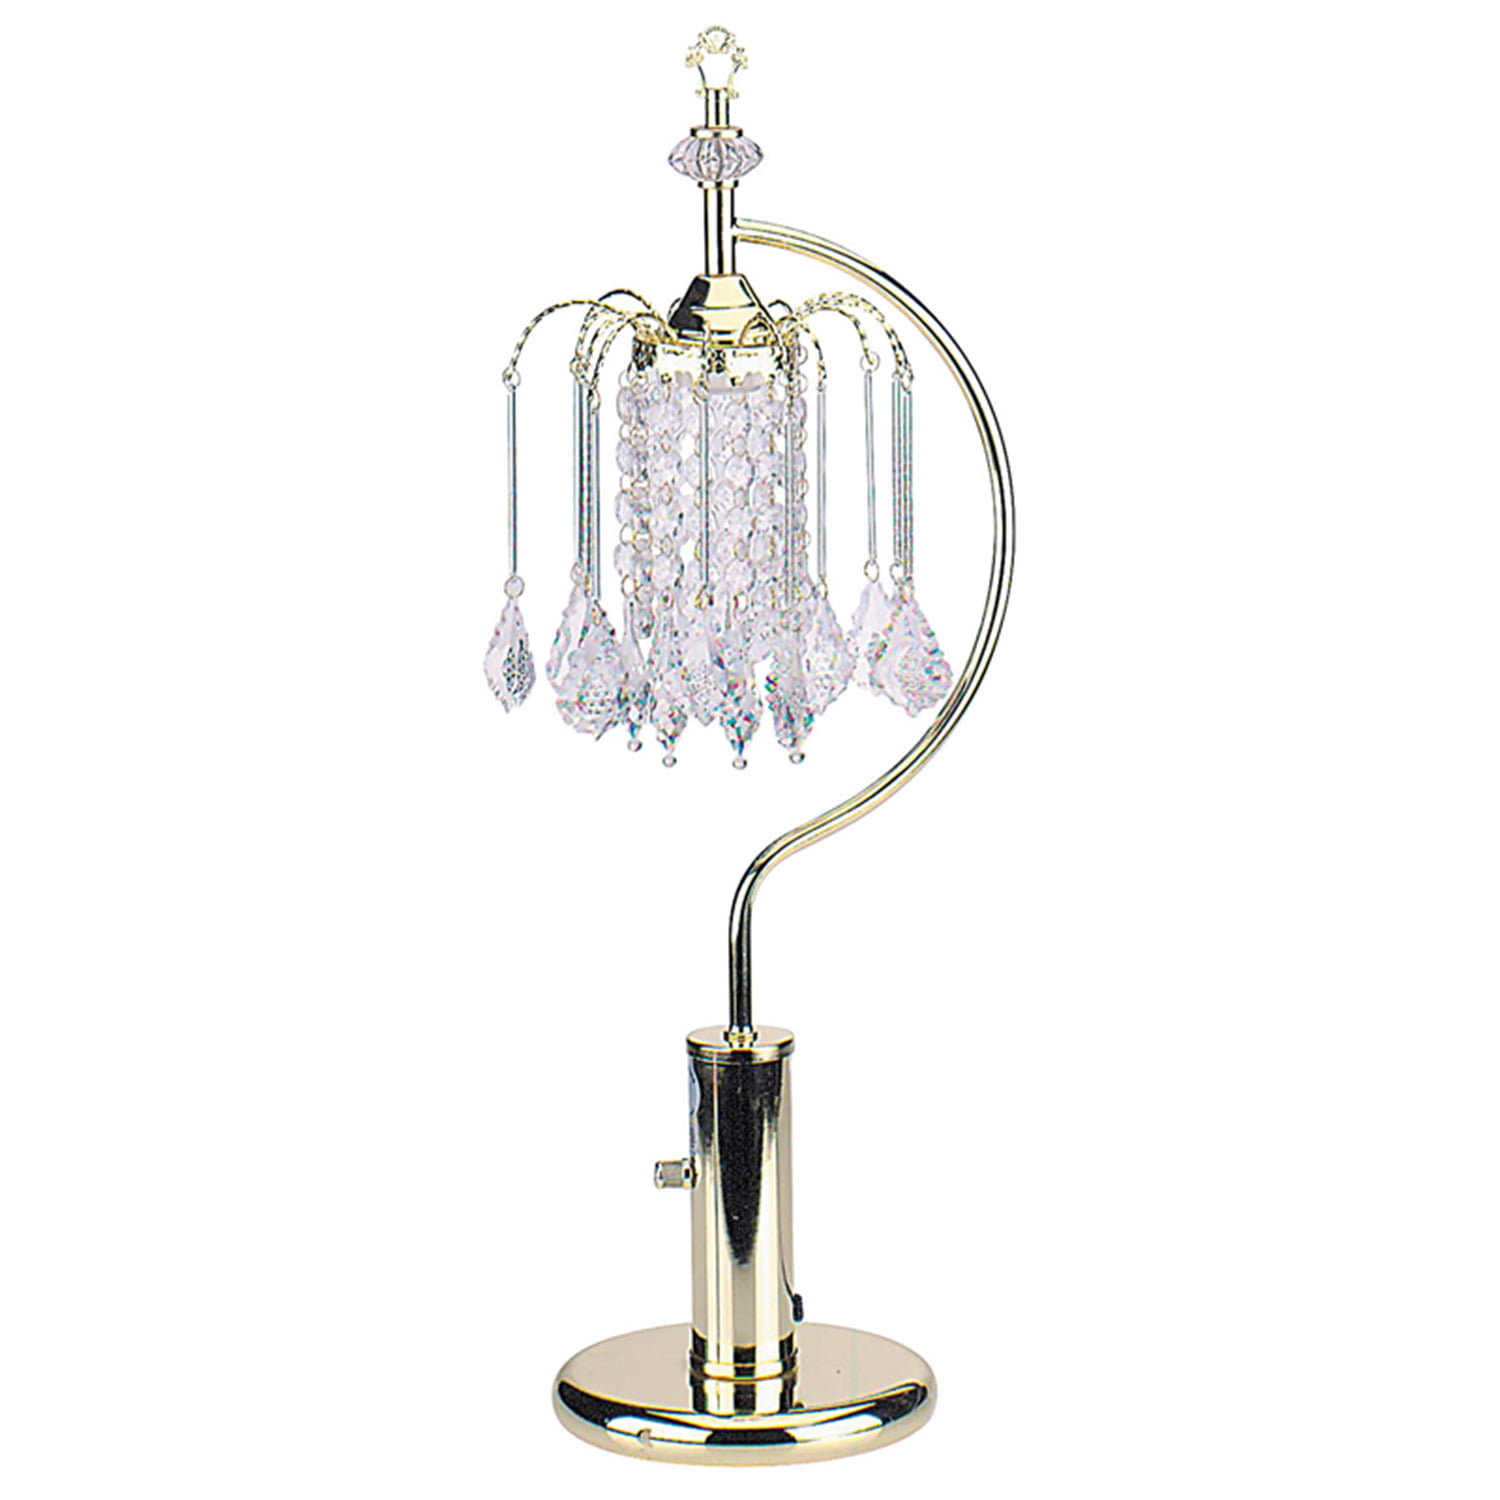 Gold Table Lamp With Crystal Inspired, Crystal Chandelier Style Table Lamps